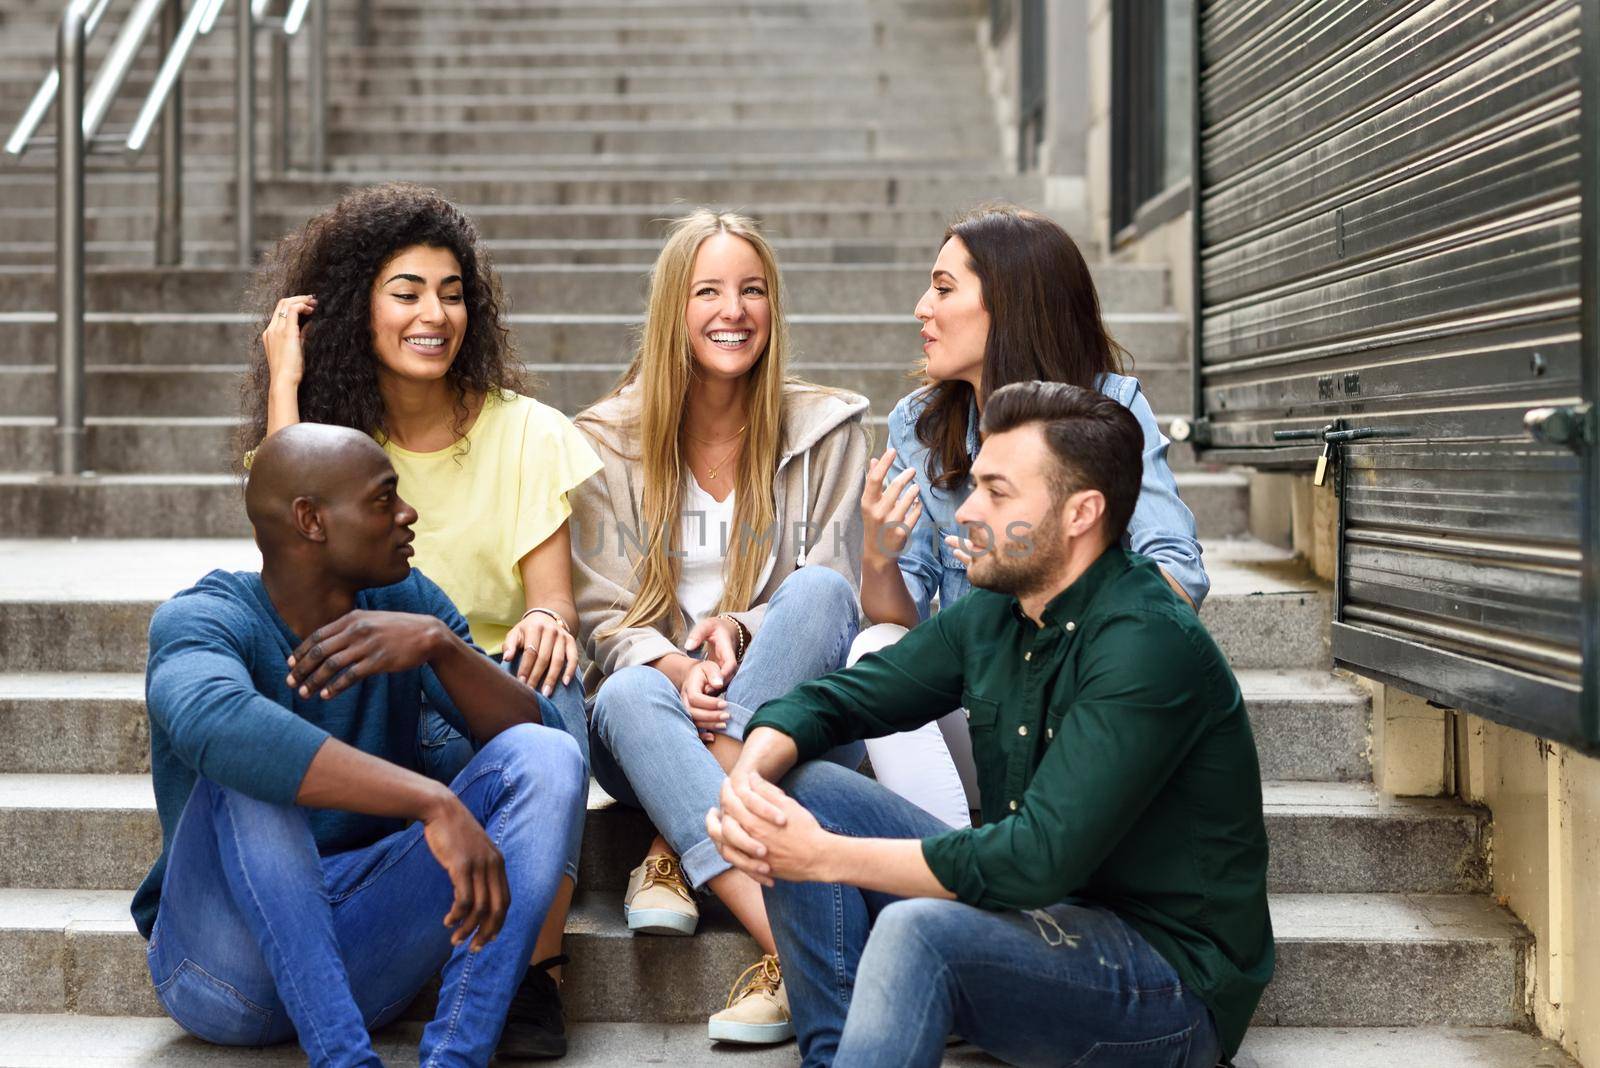 Multi-ethnic group of young people having fun together outdoors in urban background. group of men and woman sitting together on steps.